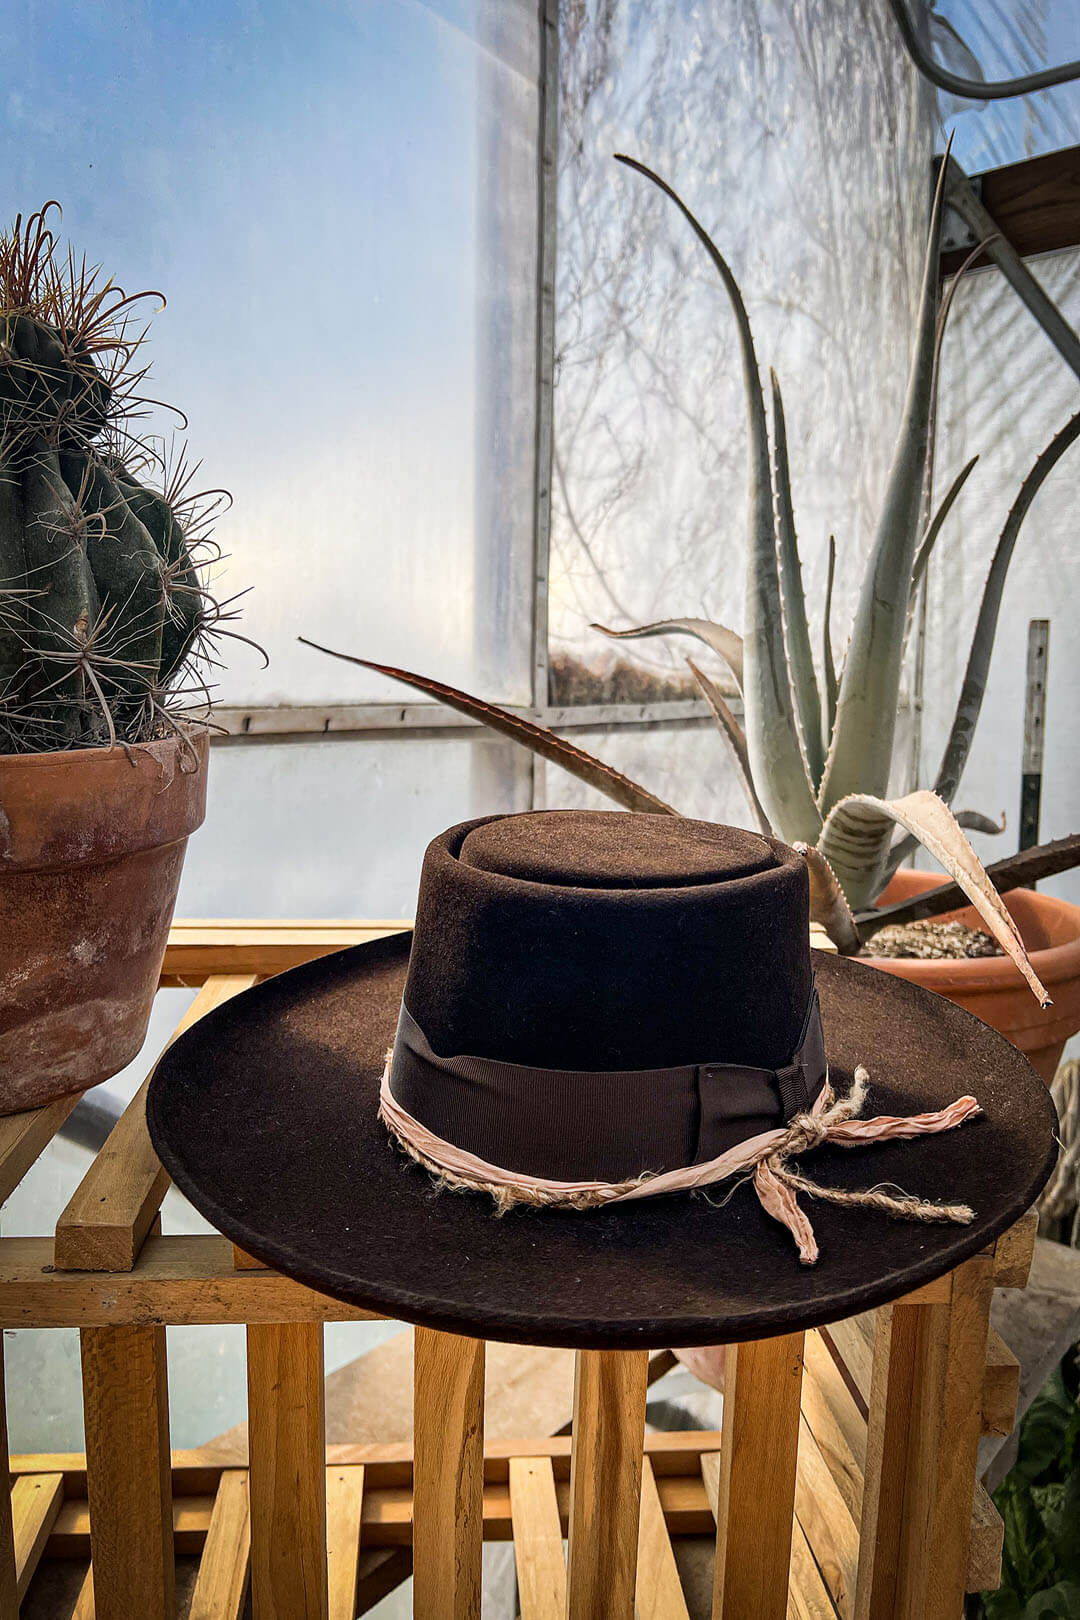 Image of the Kings Row Chocolate Felt Hat by Stetson.  The Hat is pictured on a wooden crate surrounded by cactus plants. 